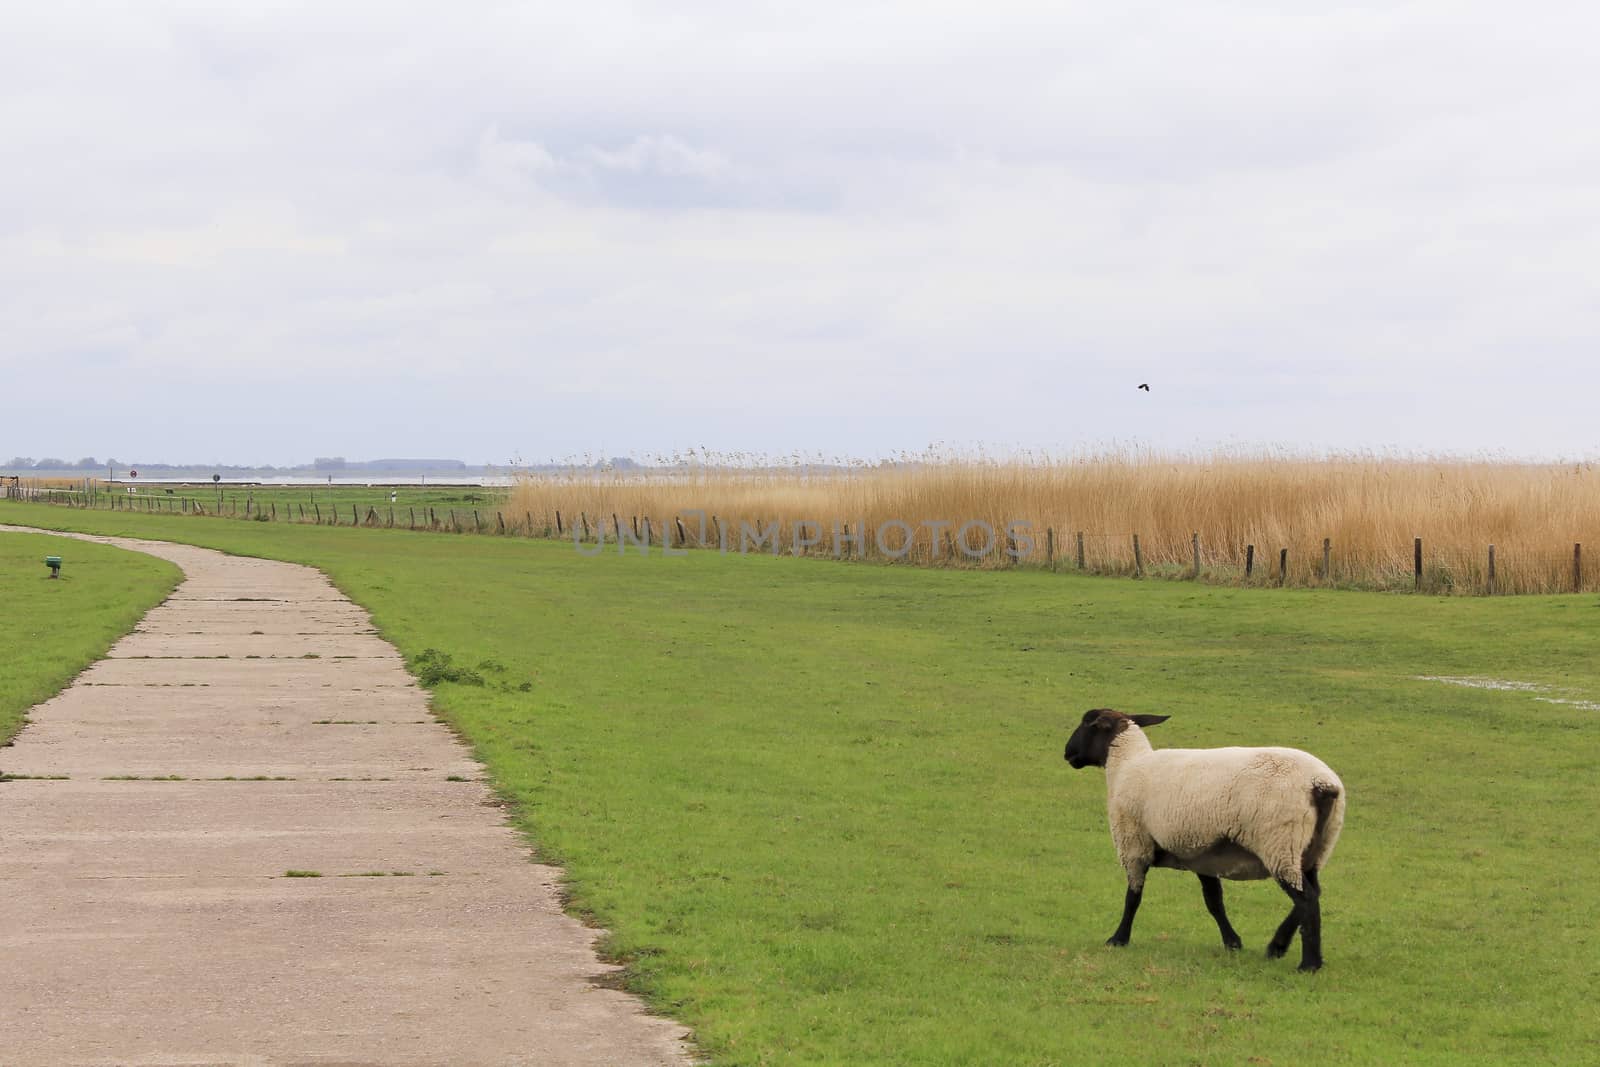 Lonely sheep separated from the herd in a typical landscape in northern Germany. Sehestedt, Jade, Lower Saxony, Germany.